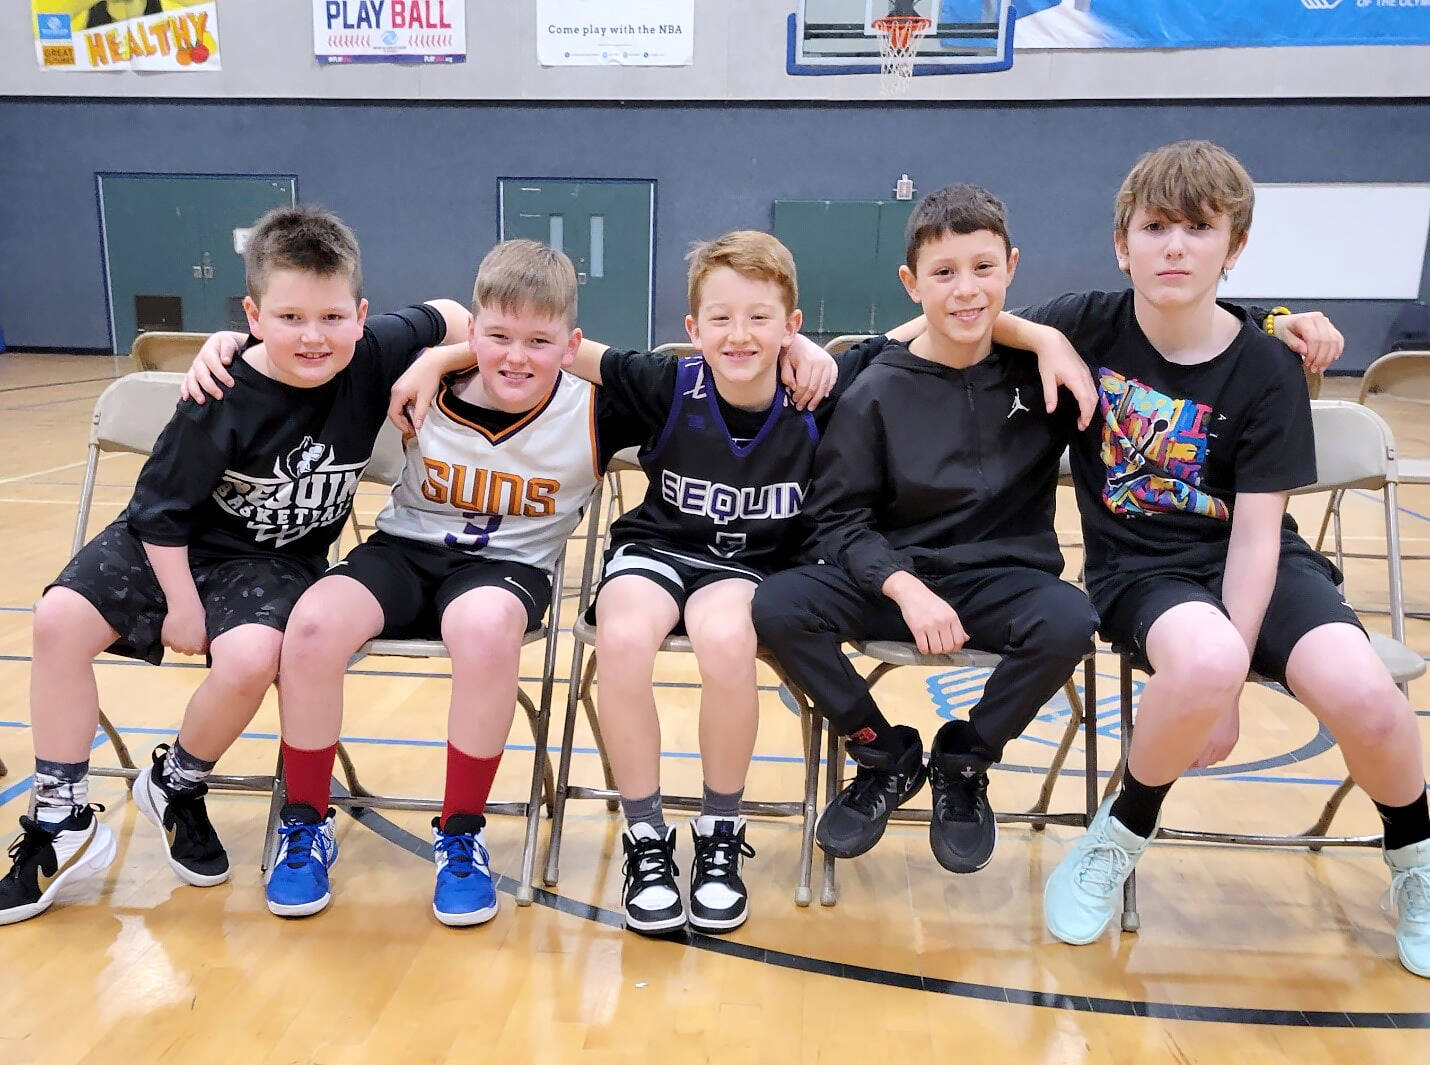 Snow and ice may have forced a delay but the Sequim Elks Lodge recently held its National Hoop Shoot competition at the Sequim Boys & Girls Club. Contestants included, from left, Bennett Castell, Grayson Castell, Roman Bacchus, Maks Lopez and Luca Blake. Bennett Castle won the 8-9 age bracket, Bacchus the 10-11 division and Blake the 12-13 group and all three will compete at the district-level of the National Hoop Shoot competition.